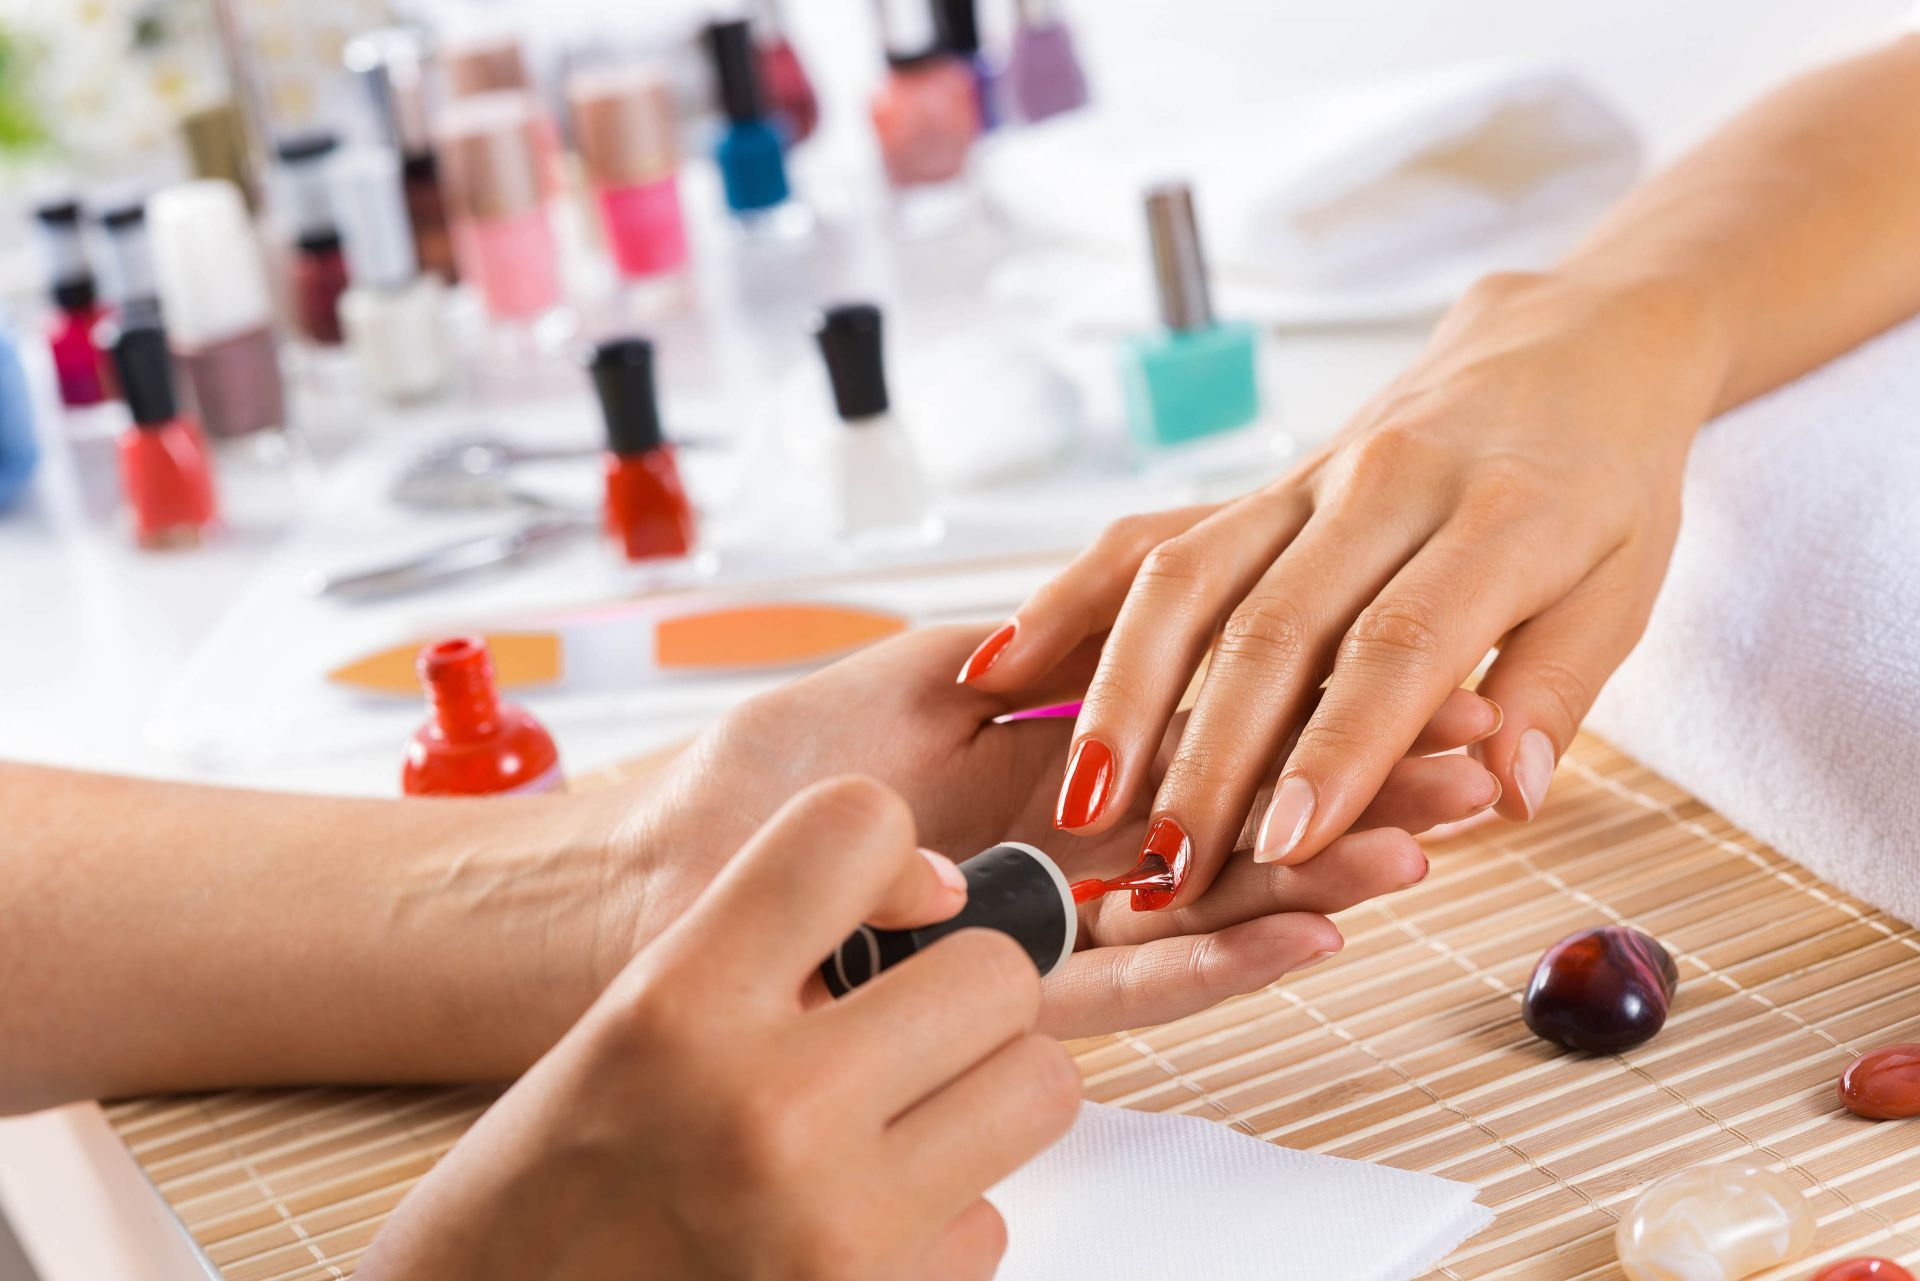 Manicure and pedicure services in Athens, Greece